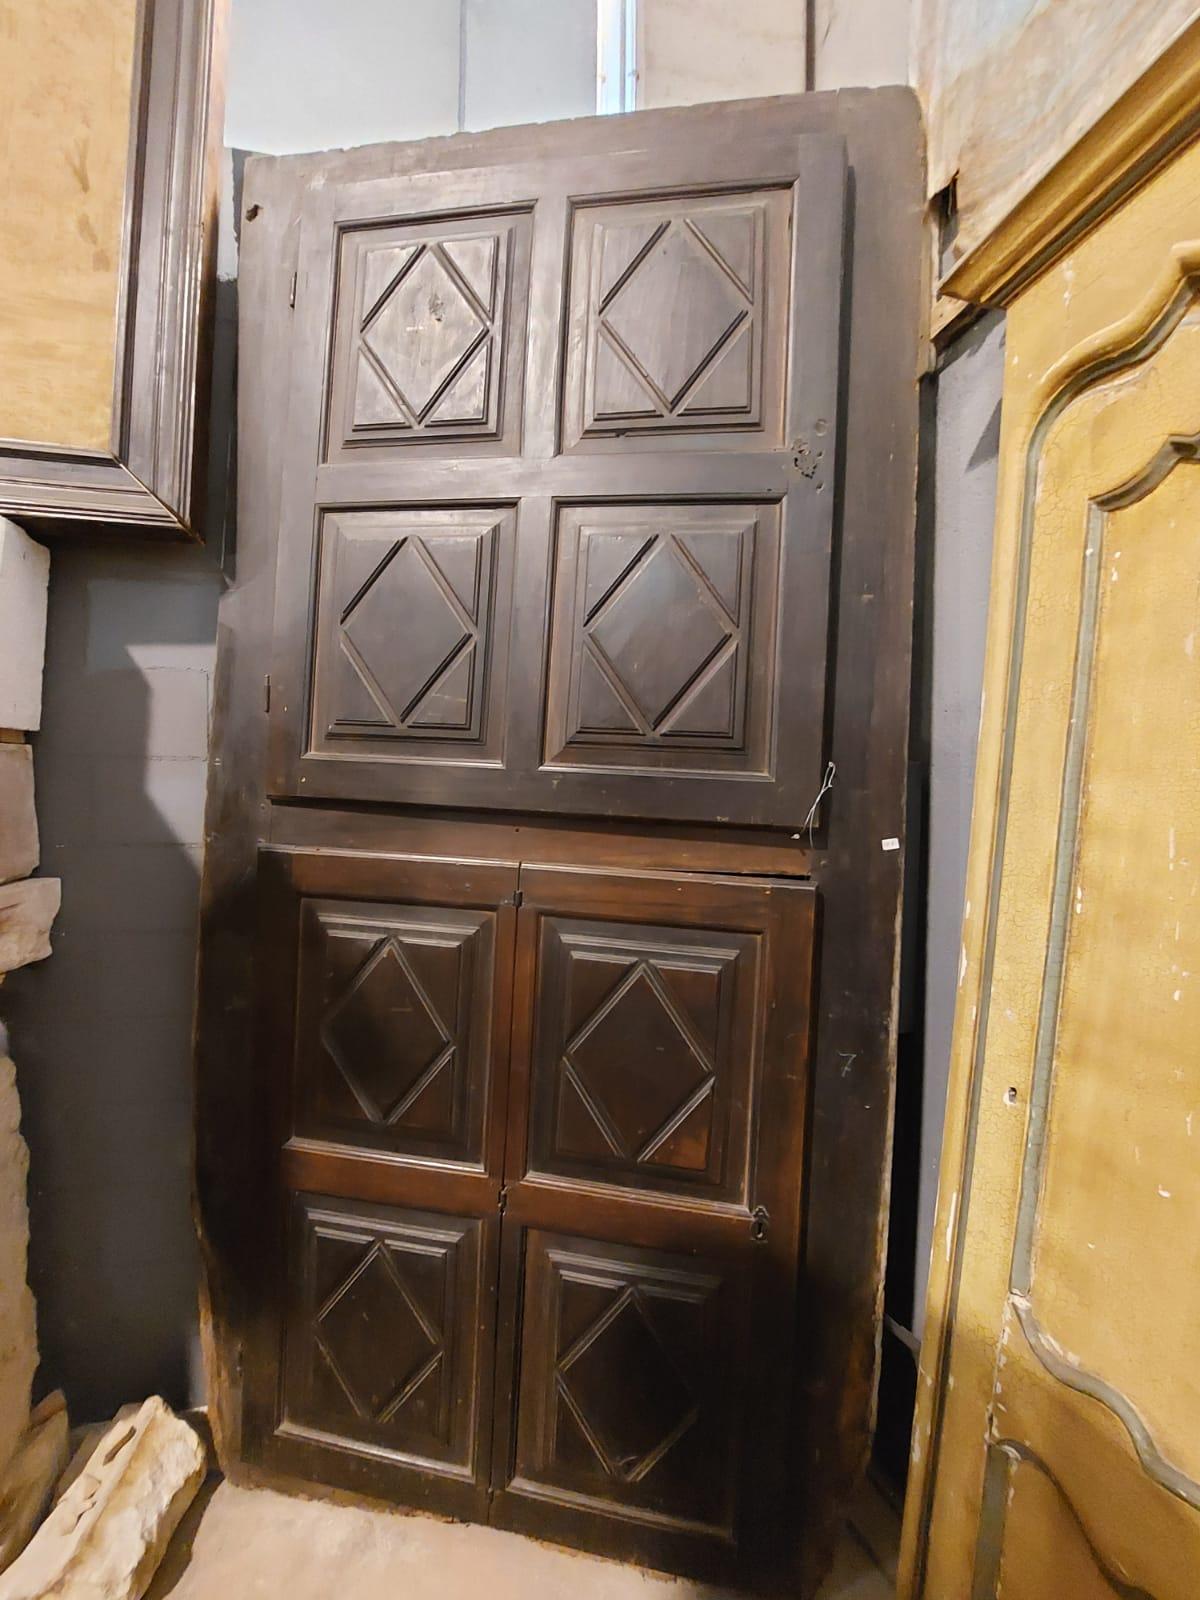 Antique walnut wall placard, cupboard with double body doors, built-in wardrobe with doors carved in precious walnut, lozenge shapes, has a large door above and a door that opens like a book at the bottom, in good condition with some small